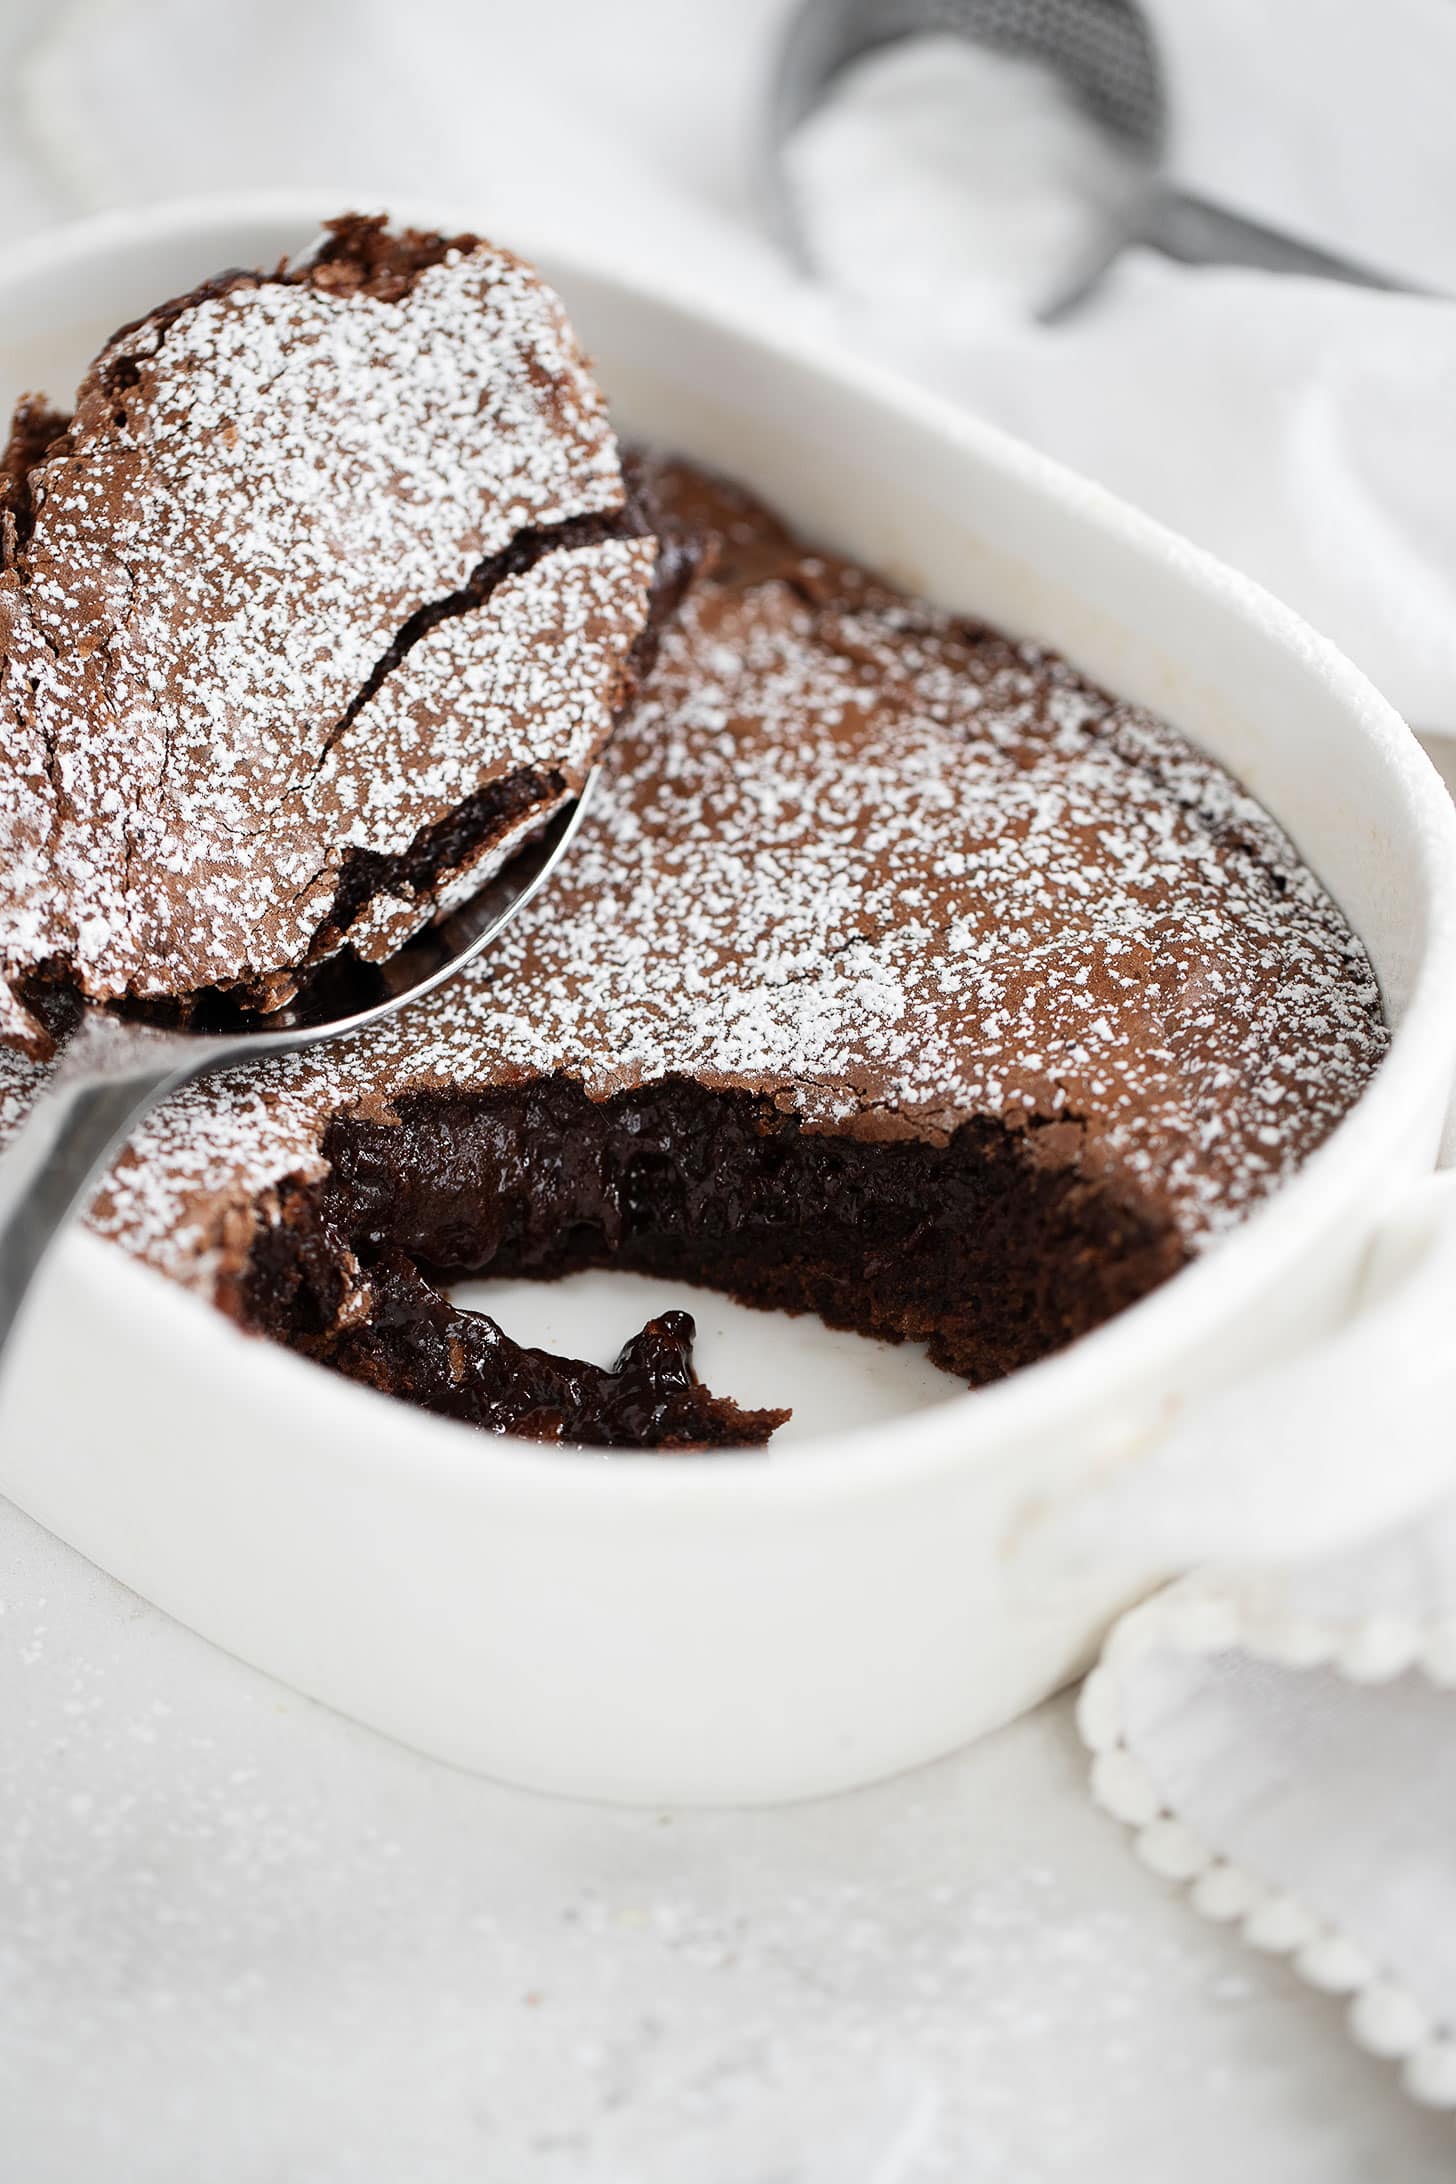 Chocolate brownie cake in baking dish with spoon.